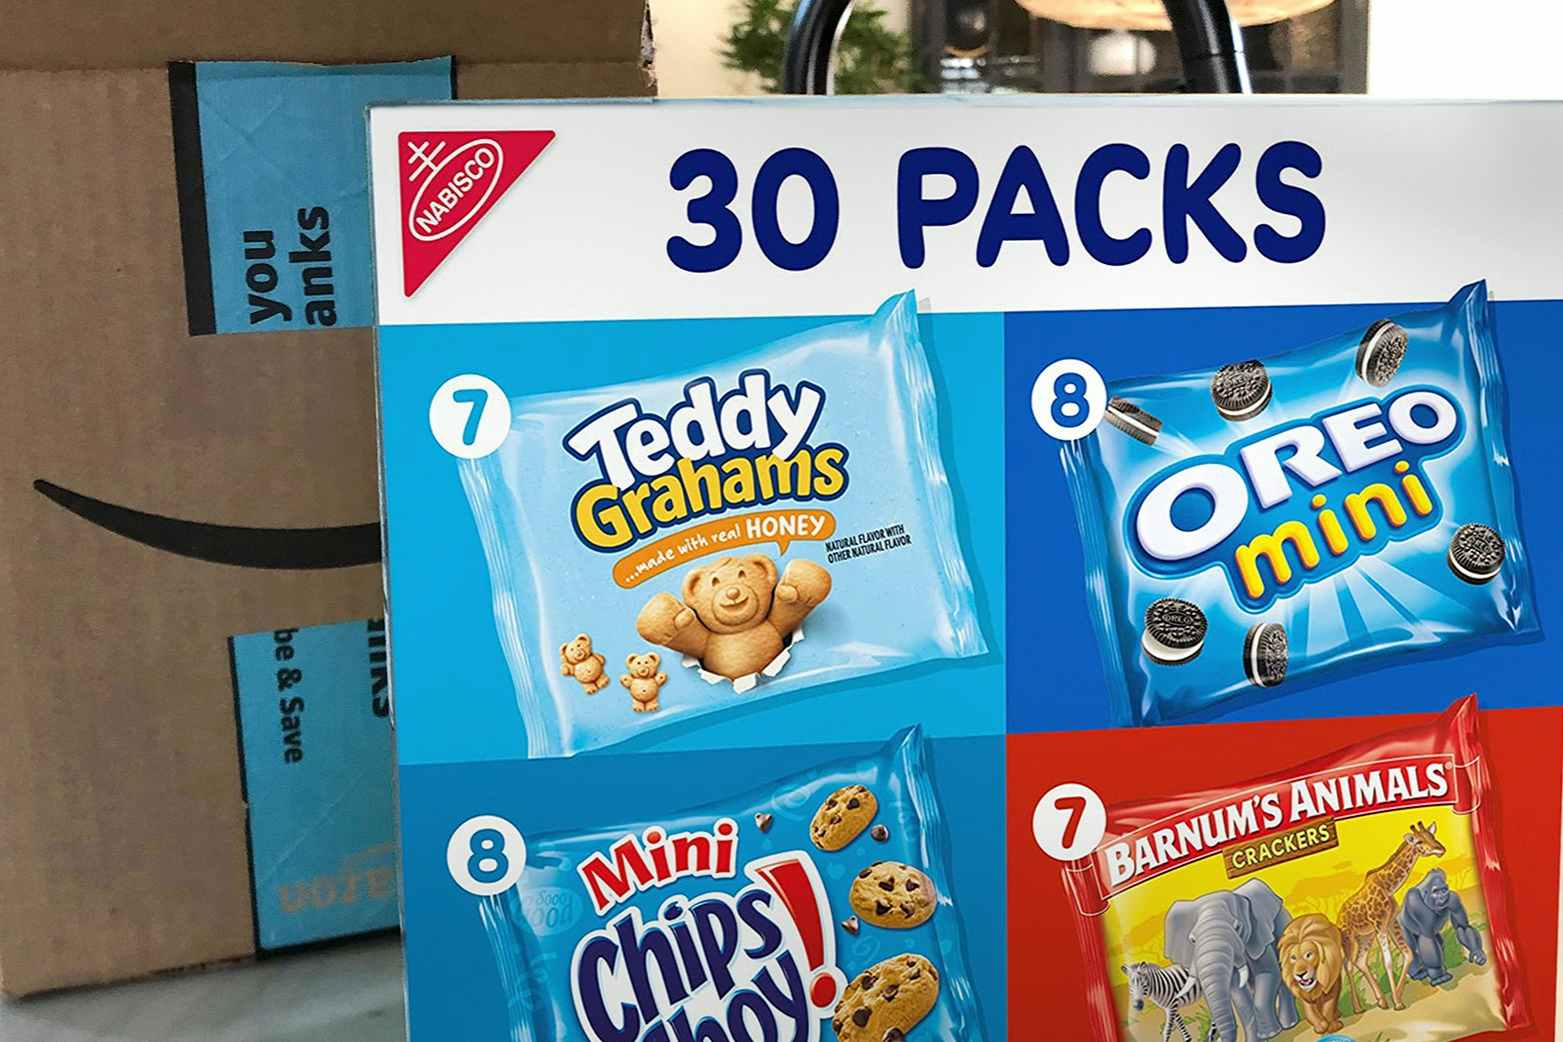 Nabisco Snack Packs, as Low as $4.85 With Amazon Coupon